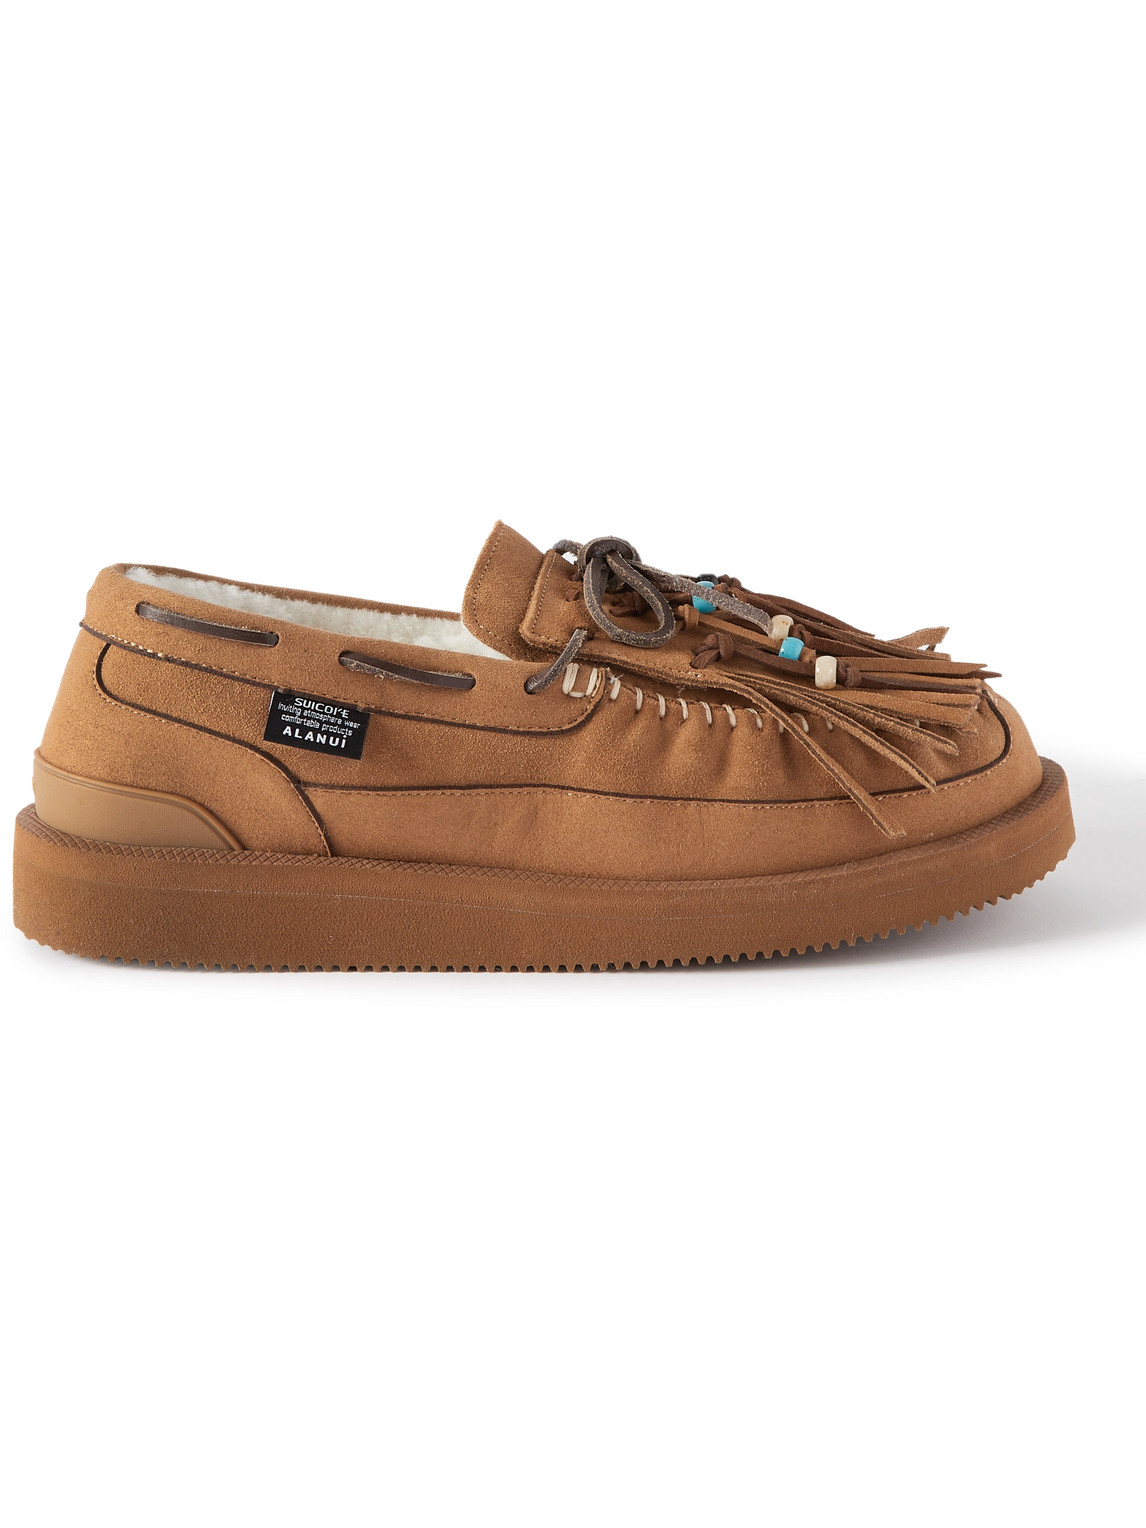 ALANUI SUICOKE OWM SHEARLING-LINED SUEDE LOAFERS